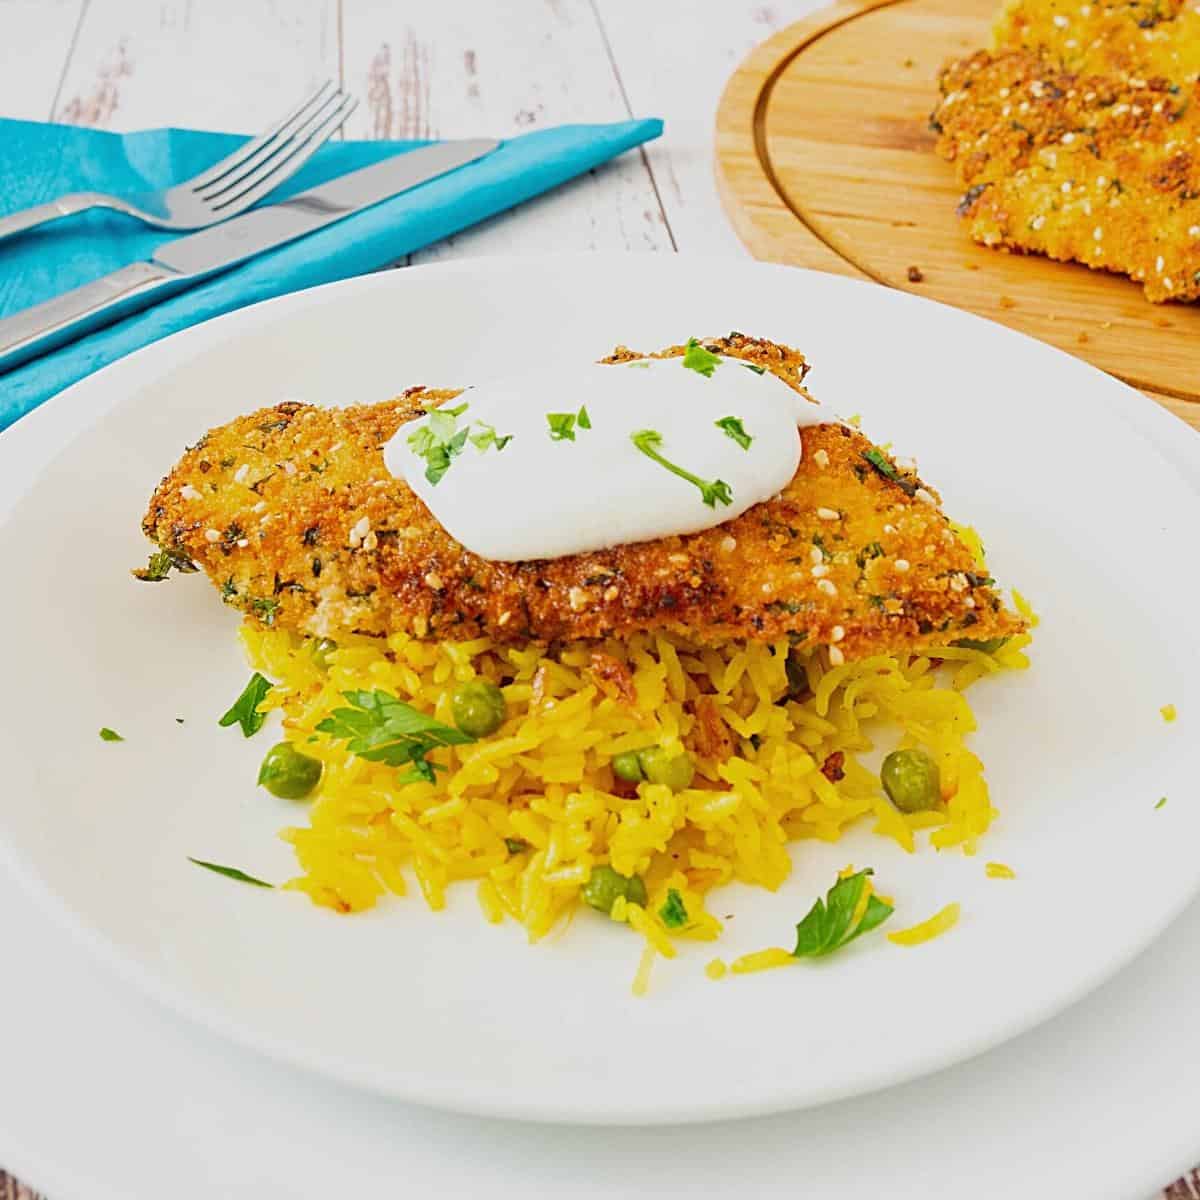 Turmeric rice topped with breaded chicken.